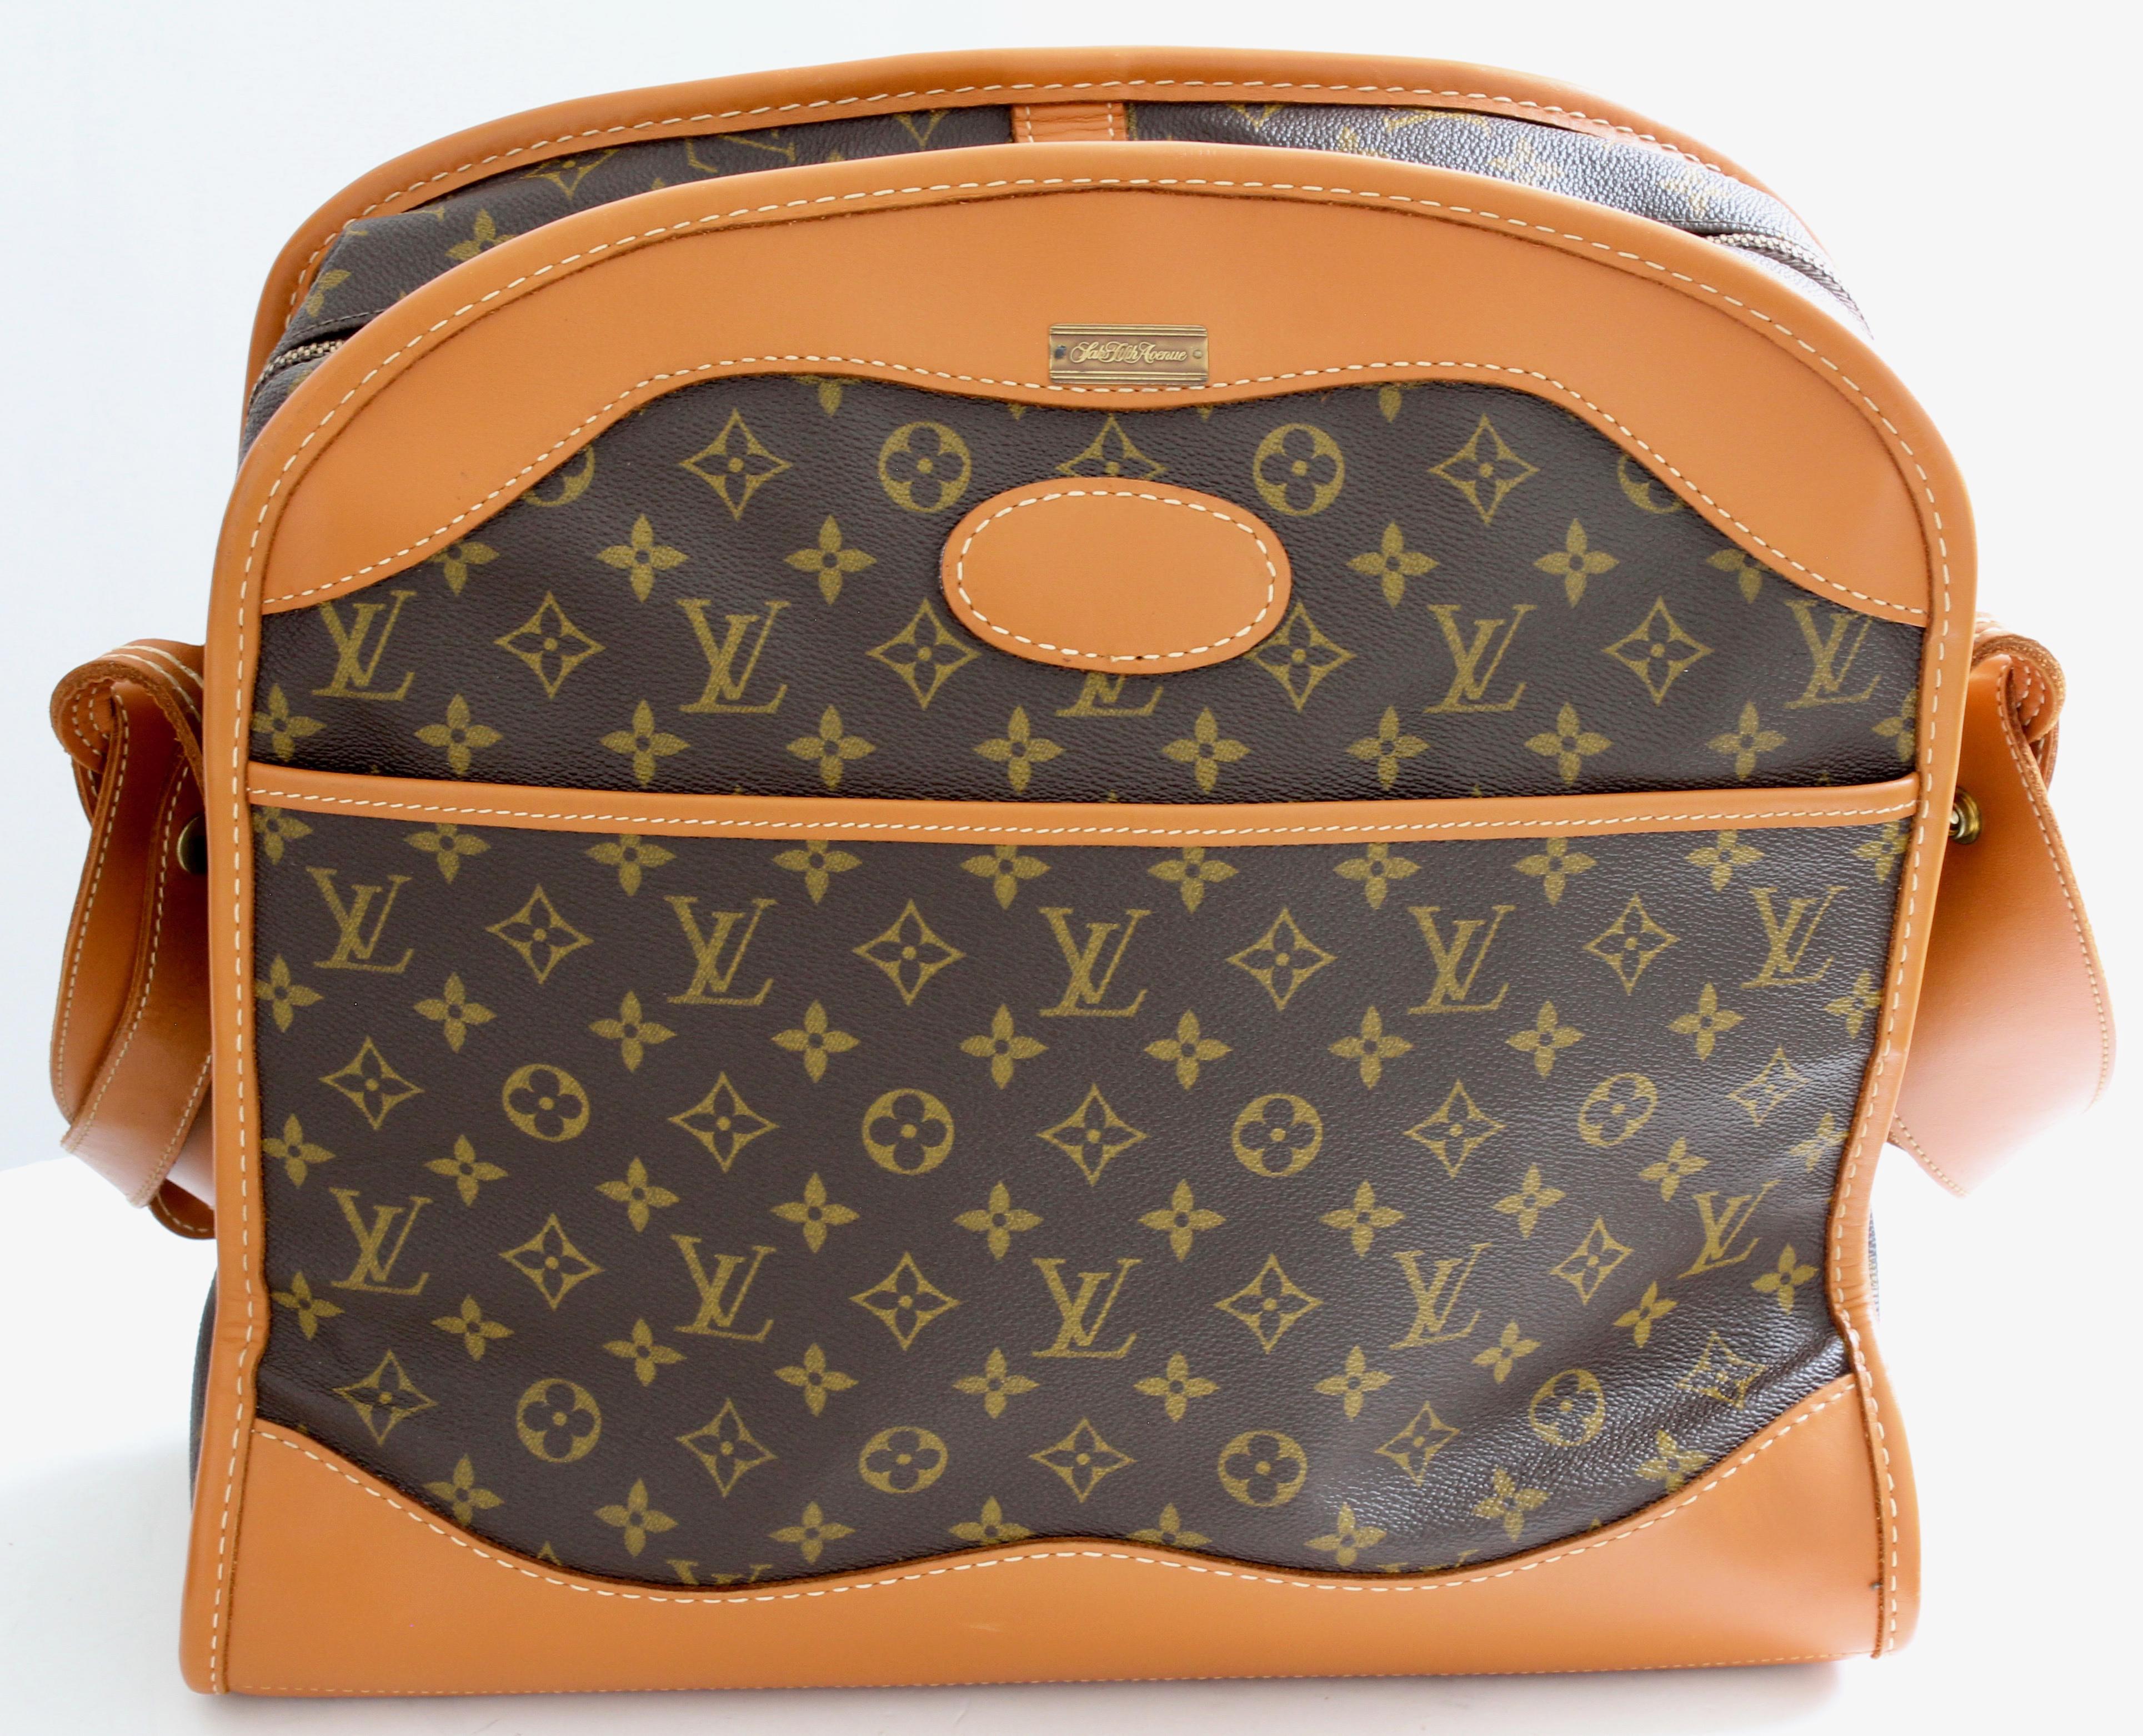 Women's or Men's Louis Vuitton Monogram Travel Bag Carry On Shoulder Bag French Co New Old Stock